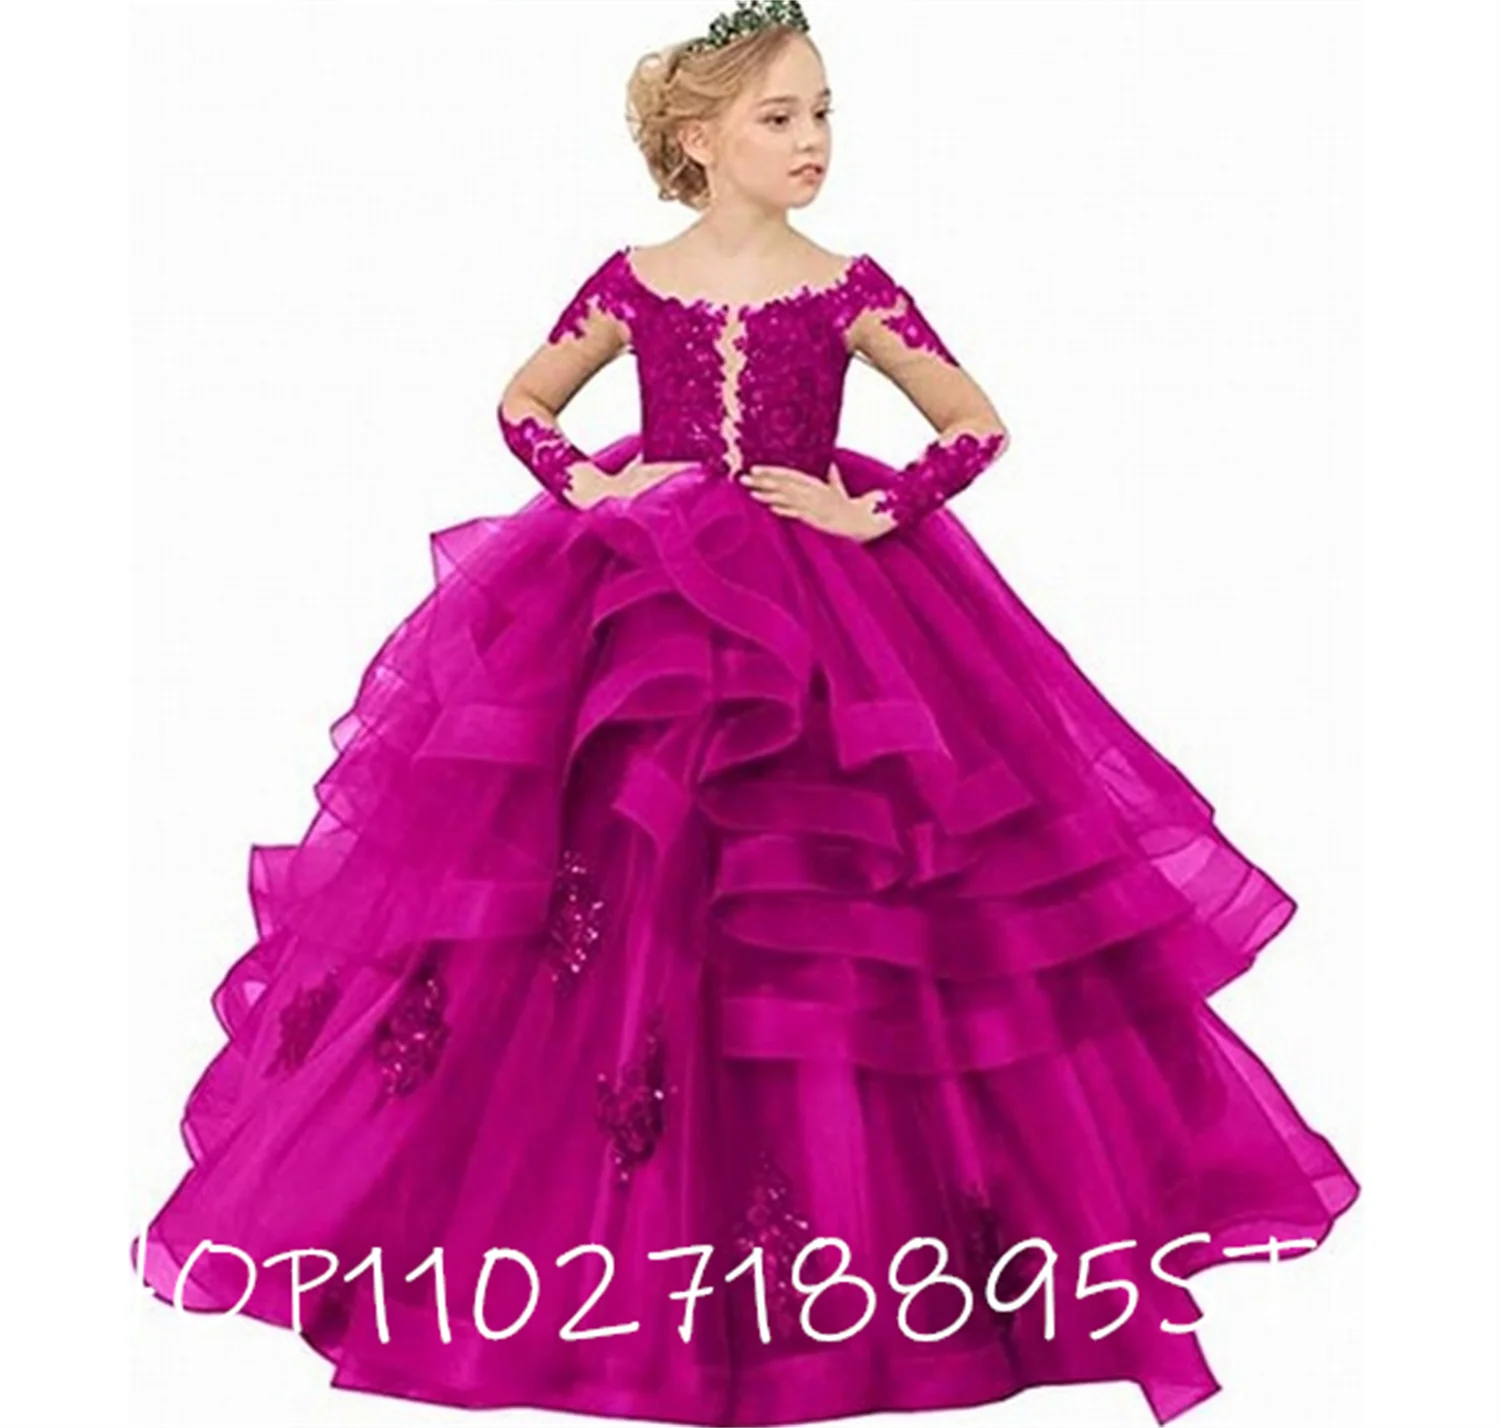 

Sheer Long Sleeve Scoop Tiered Kids Black Flower Girl Dress For Wedding Sequin Lace First Communion Ruffle Tulle Princess Gown